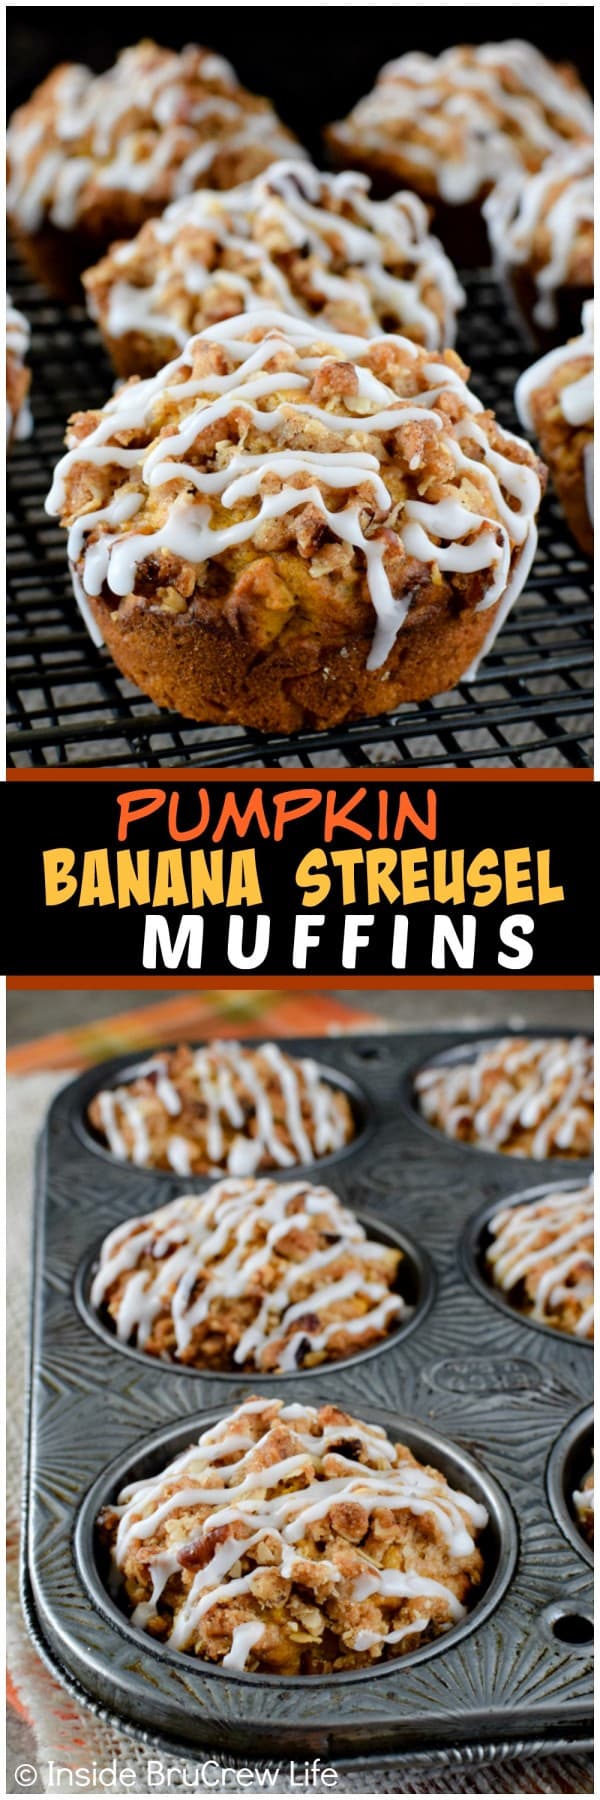 Pumpkin Banana Streusel Muffins - a crunchy topping and sweet glaze makes this soft muffins irresistible. Great breakfast recipe for fall mornings!